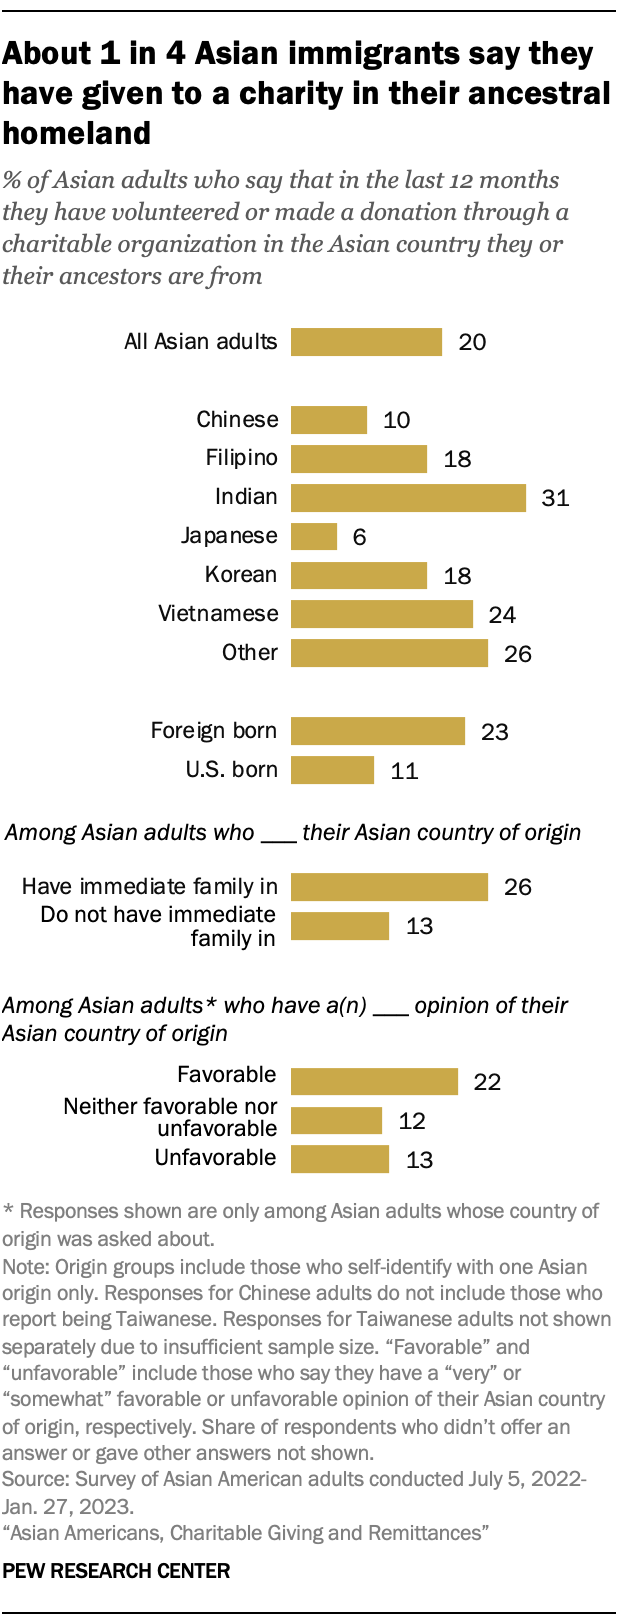 A bar chart showing the share of Asian adults who say in the last 12 months they have volunteered or made a donation through a charitable organization in the Asian country where they or their ancestors are from, by demographic groups including Asian origin, nativity, family ties to one's Asian origin country, and views of one's Asian origin country. The chart shows that about one-in-four Asian immigrants say they have given to a charity in their ancestral homeland. One-in-five Asian adults overall say this.